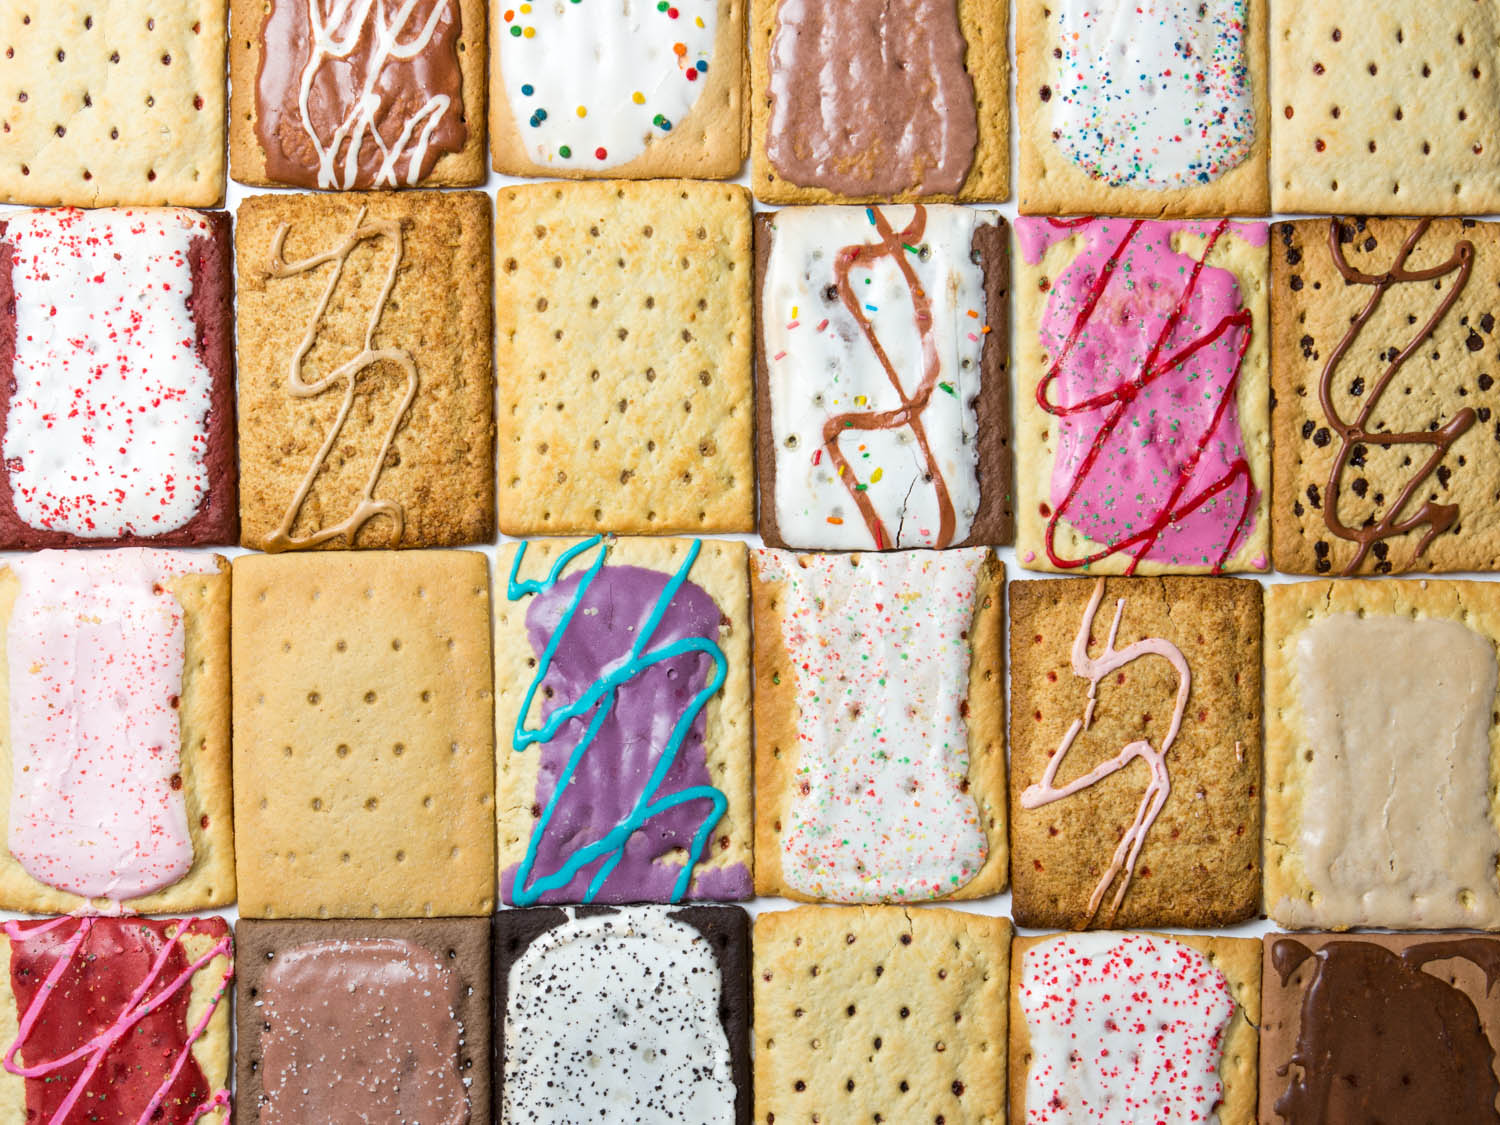 🥐 Can We Guess Your Age and Gender Based on the Pastries You’ve Eaten? Pop-Tarts